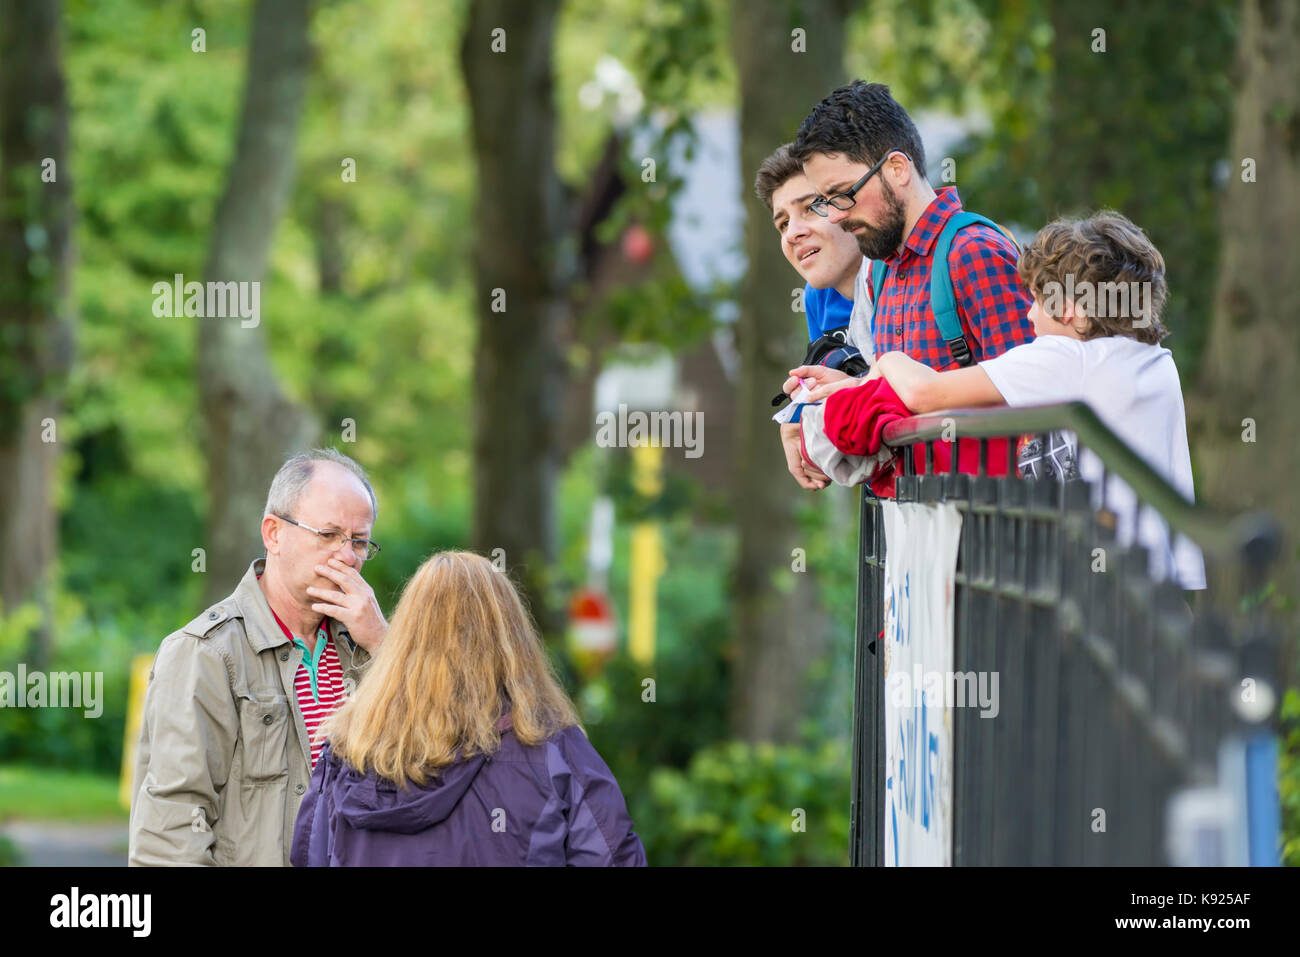 Tourists speaking to strangers and asking directions. Stock Photo